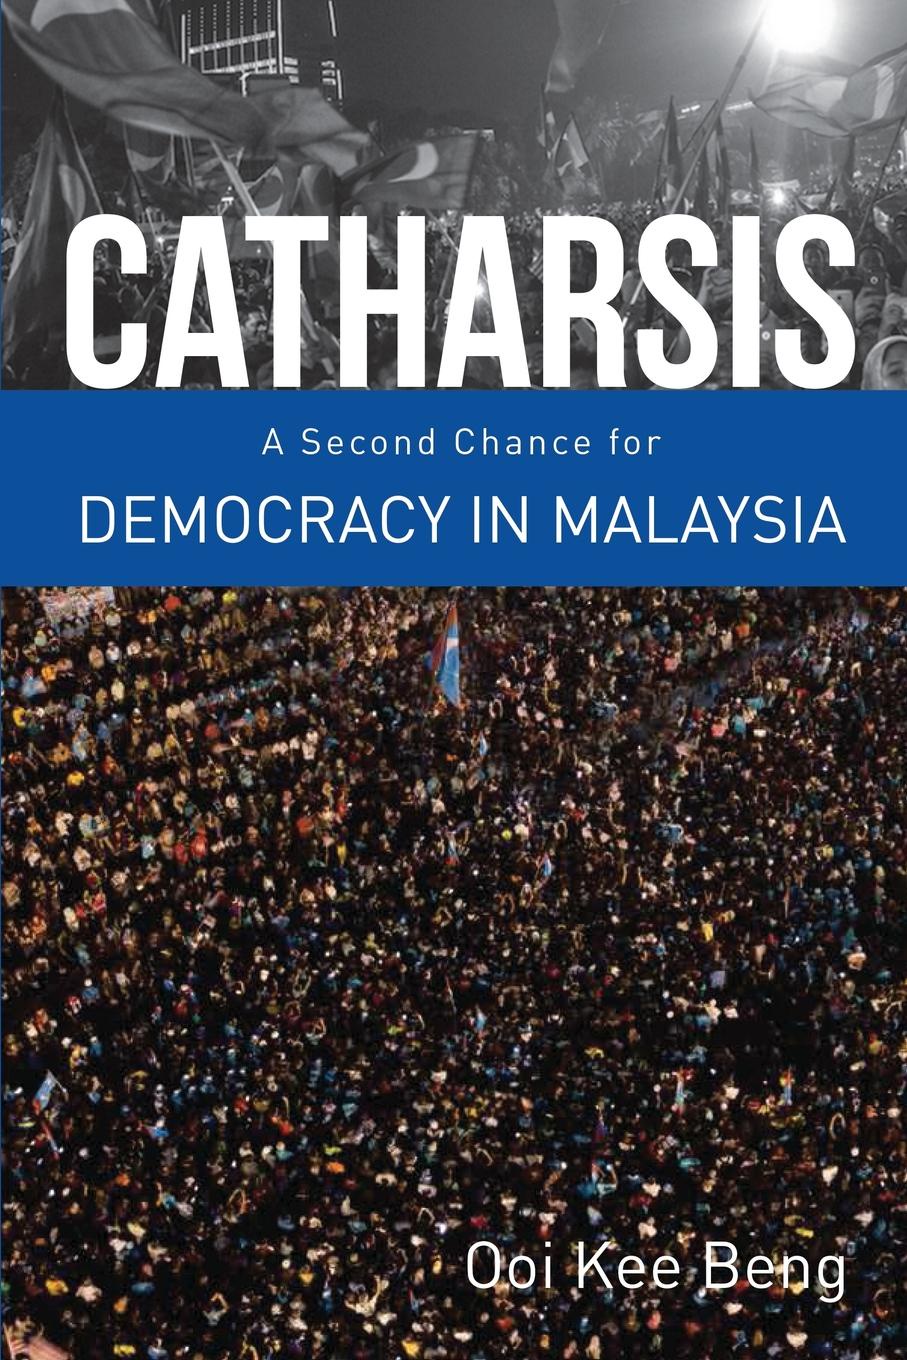 Catharsis. A Second Chance for Democracy in Malaysia